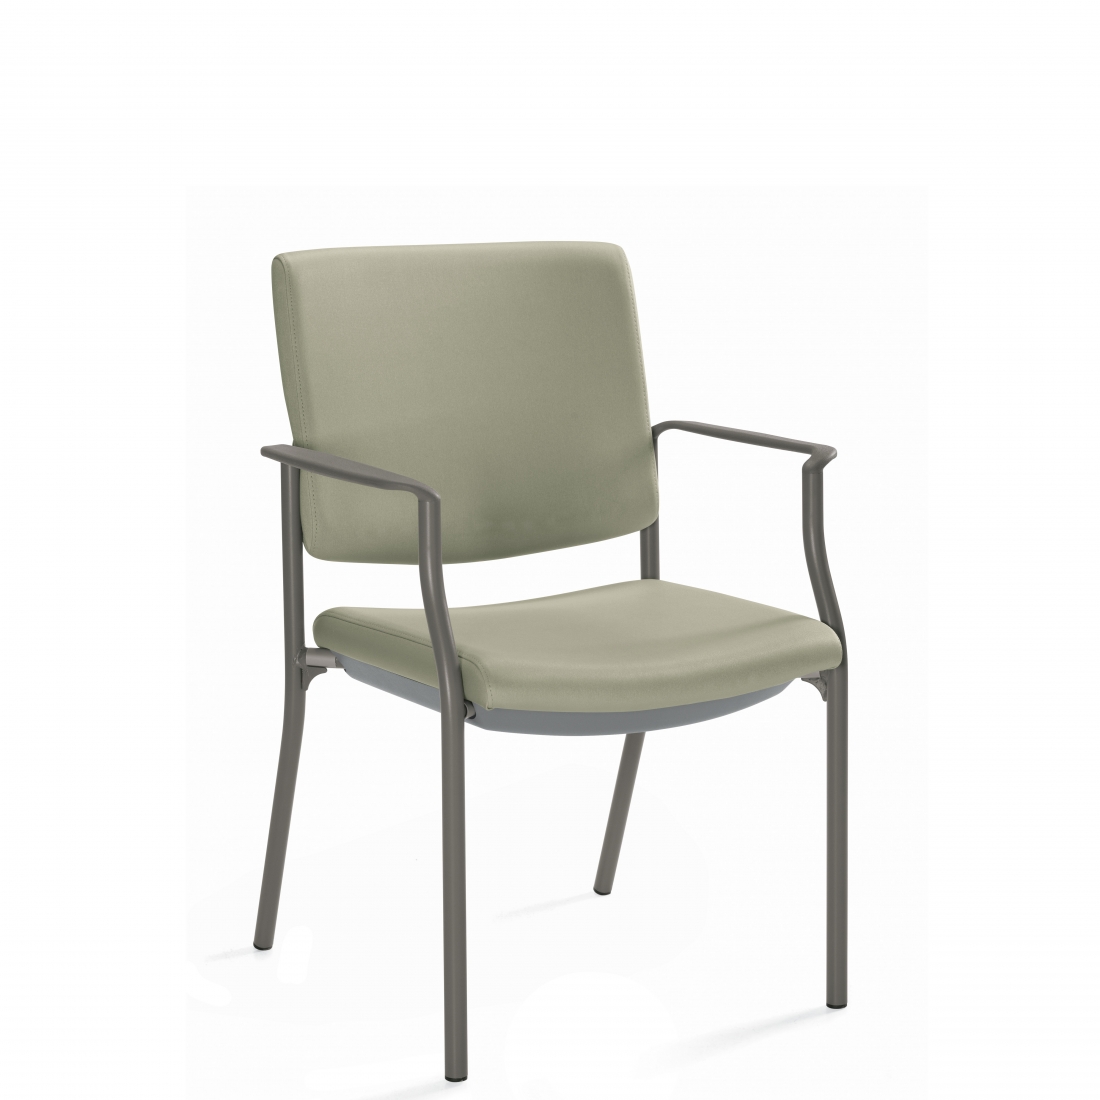 Armchair, Rectangular Back, Concealed Attachment